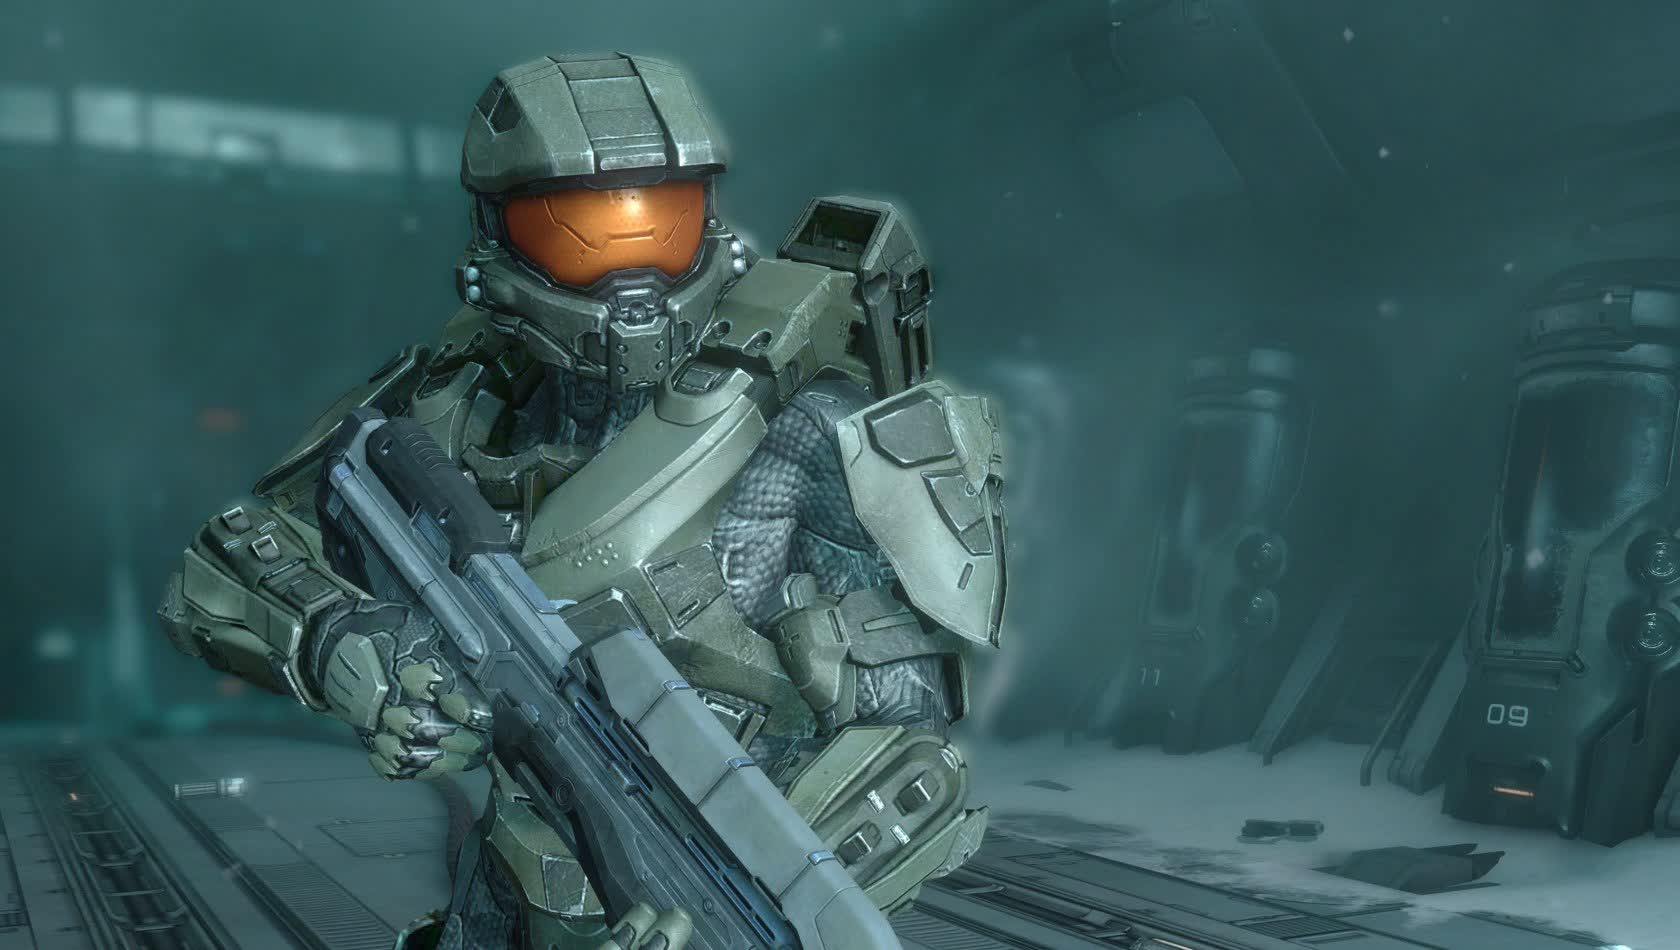 Halo 4 is coming to PC on November 17 as part of the Master Chief Collection